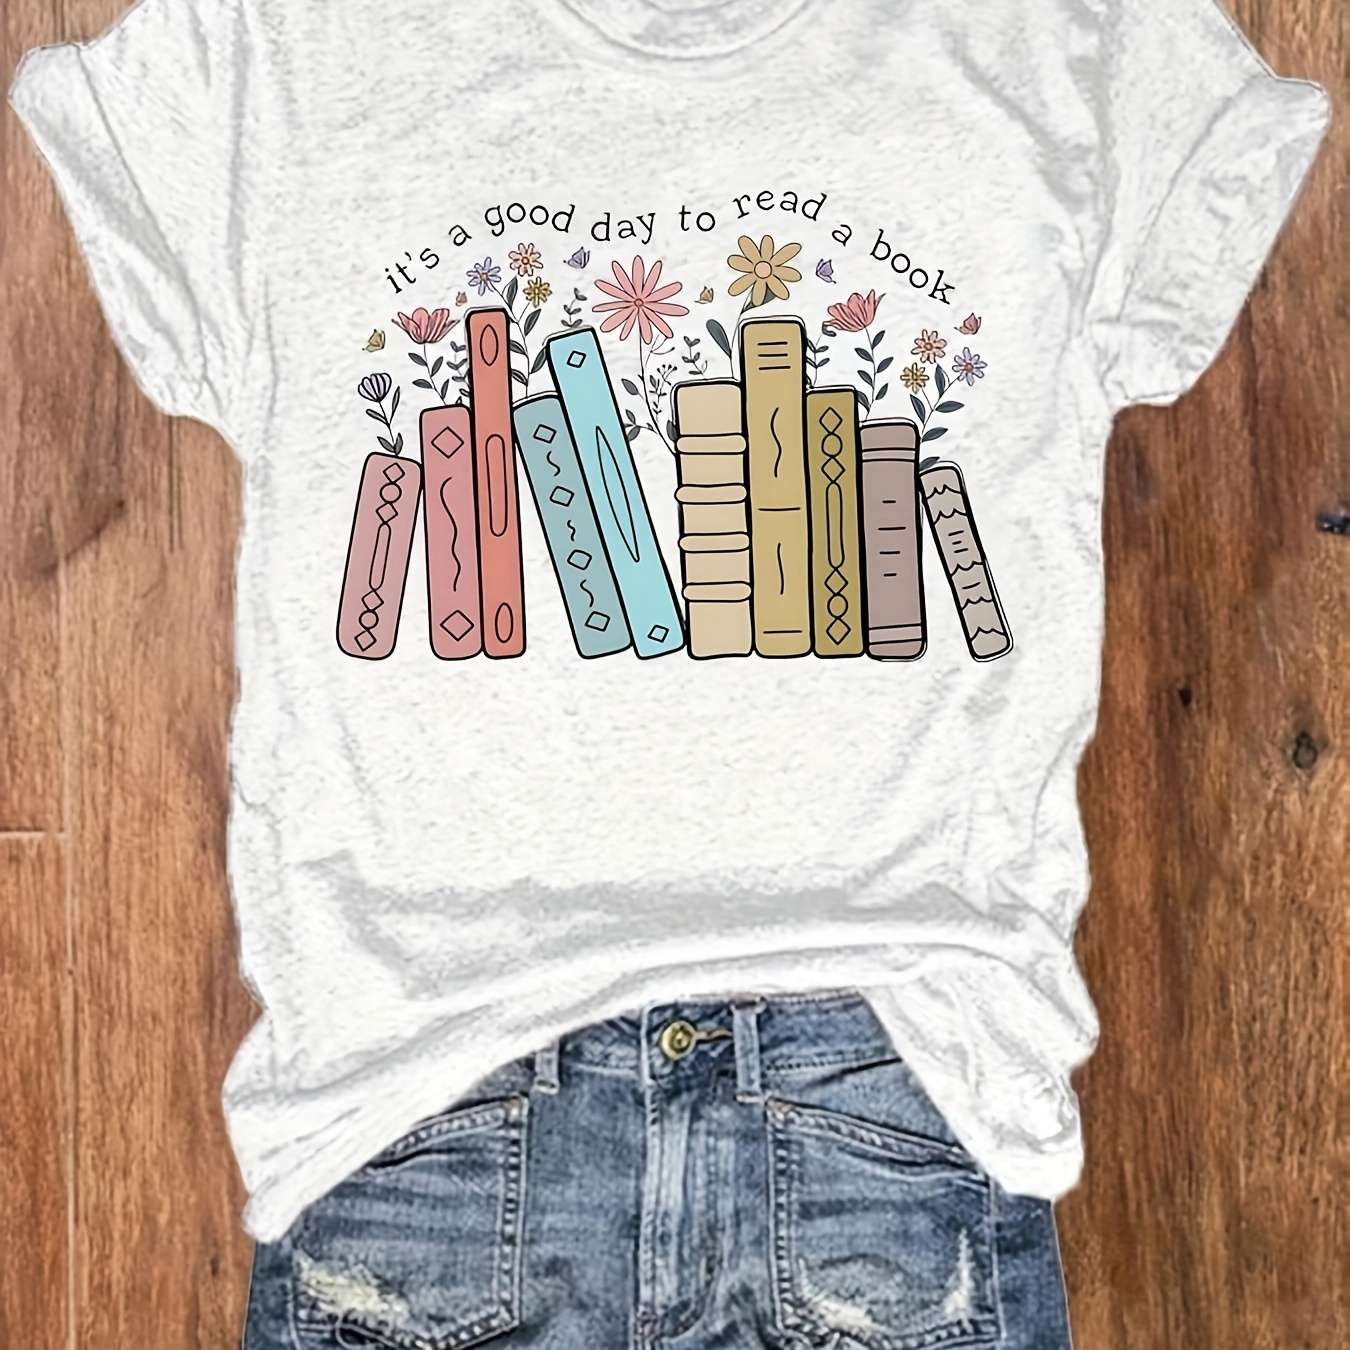 

Book Print T-shirt, Short Sleeve Crew Neck Casual Top For Summer & Spring, Women's Clothing